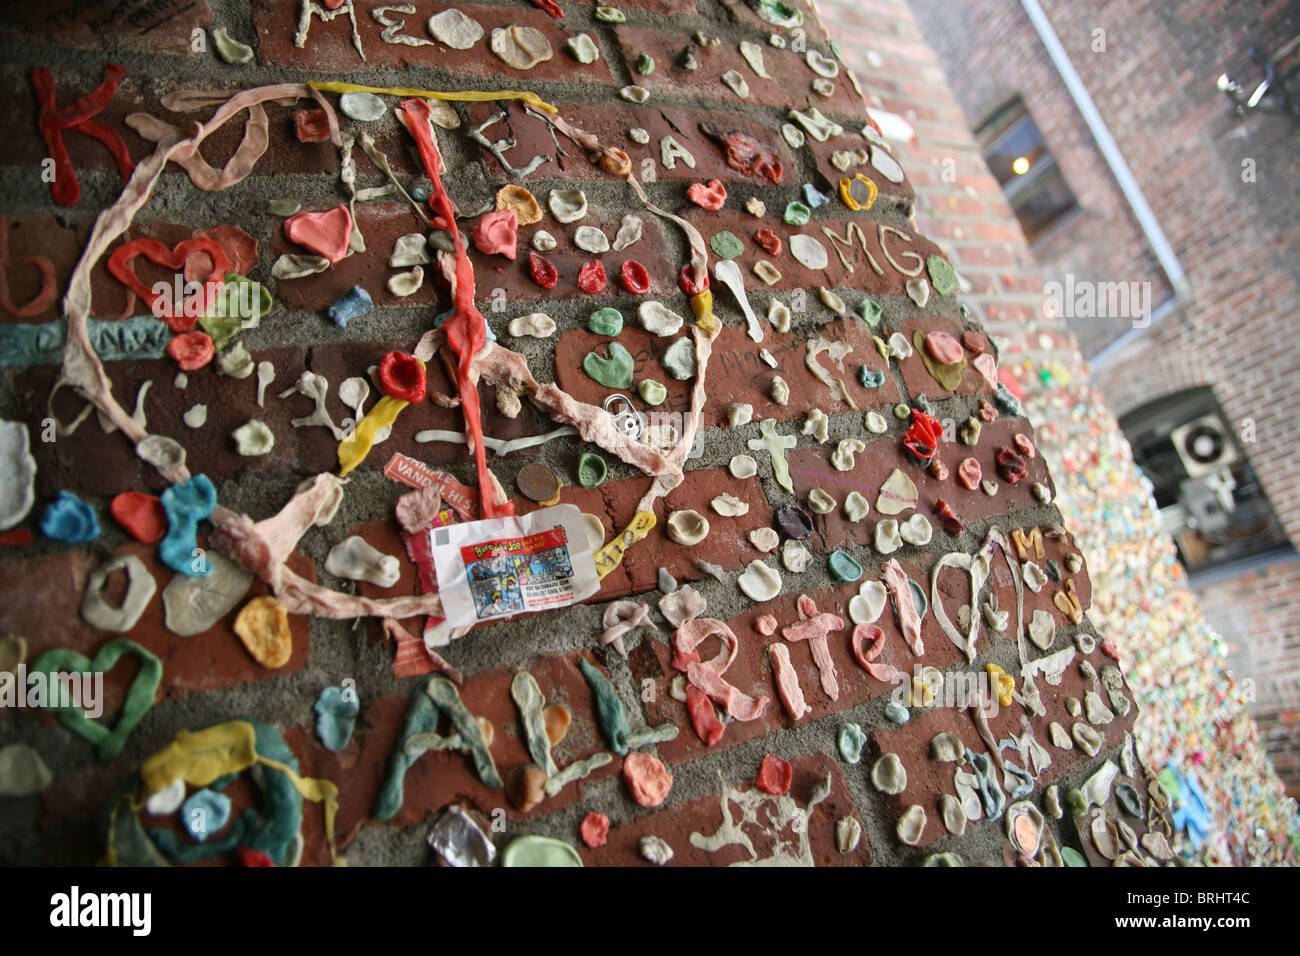 The gum wall in Seattle's Post Alley section of Pike Place Market. Stock Photo